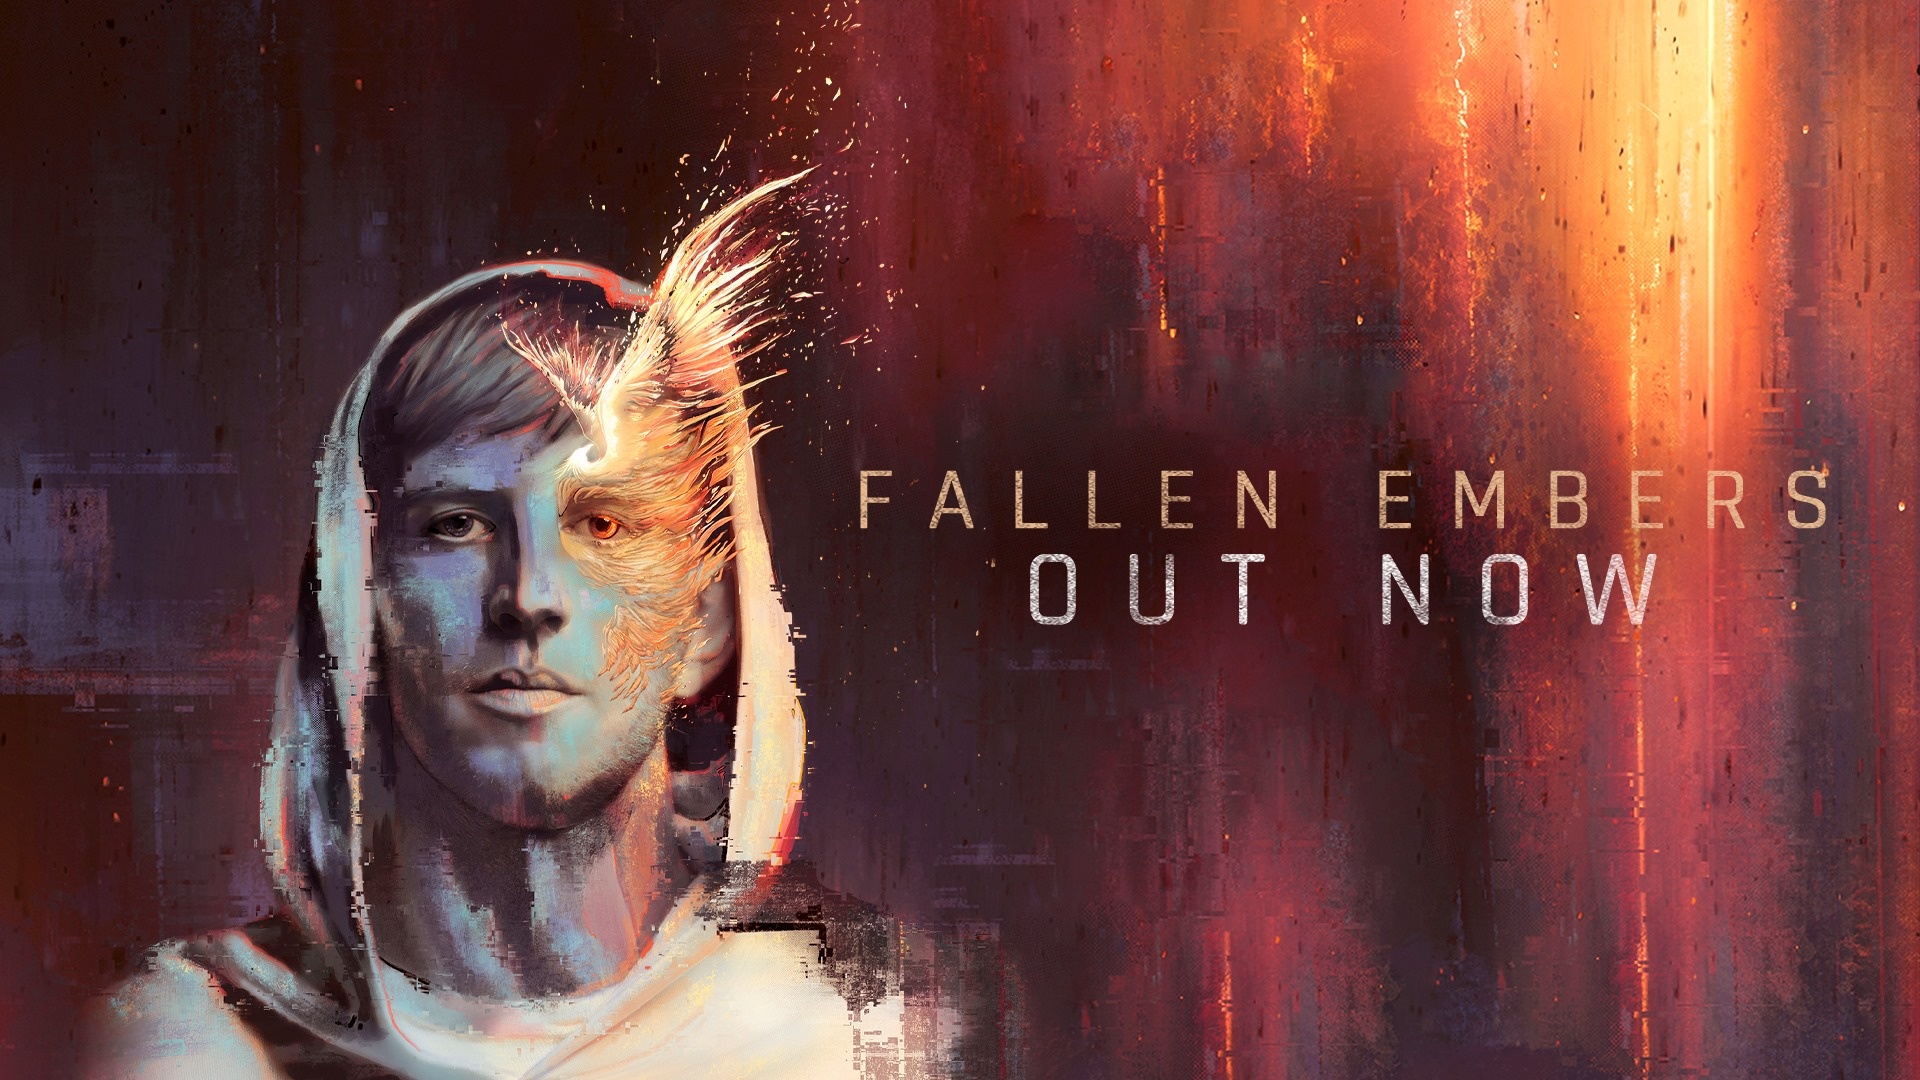 ILLENIUM Welcomes His Next Generation of Music With His Fourth Album Fallen Embers - Heard It Here First 1920x1080